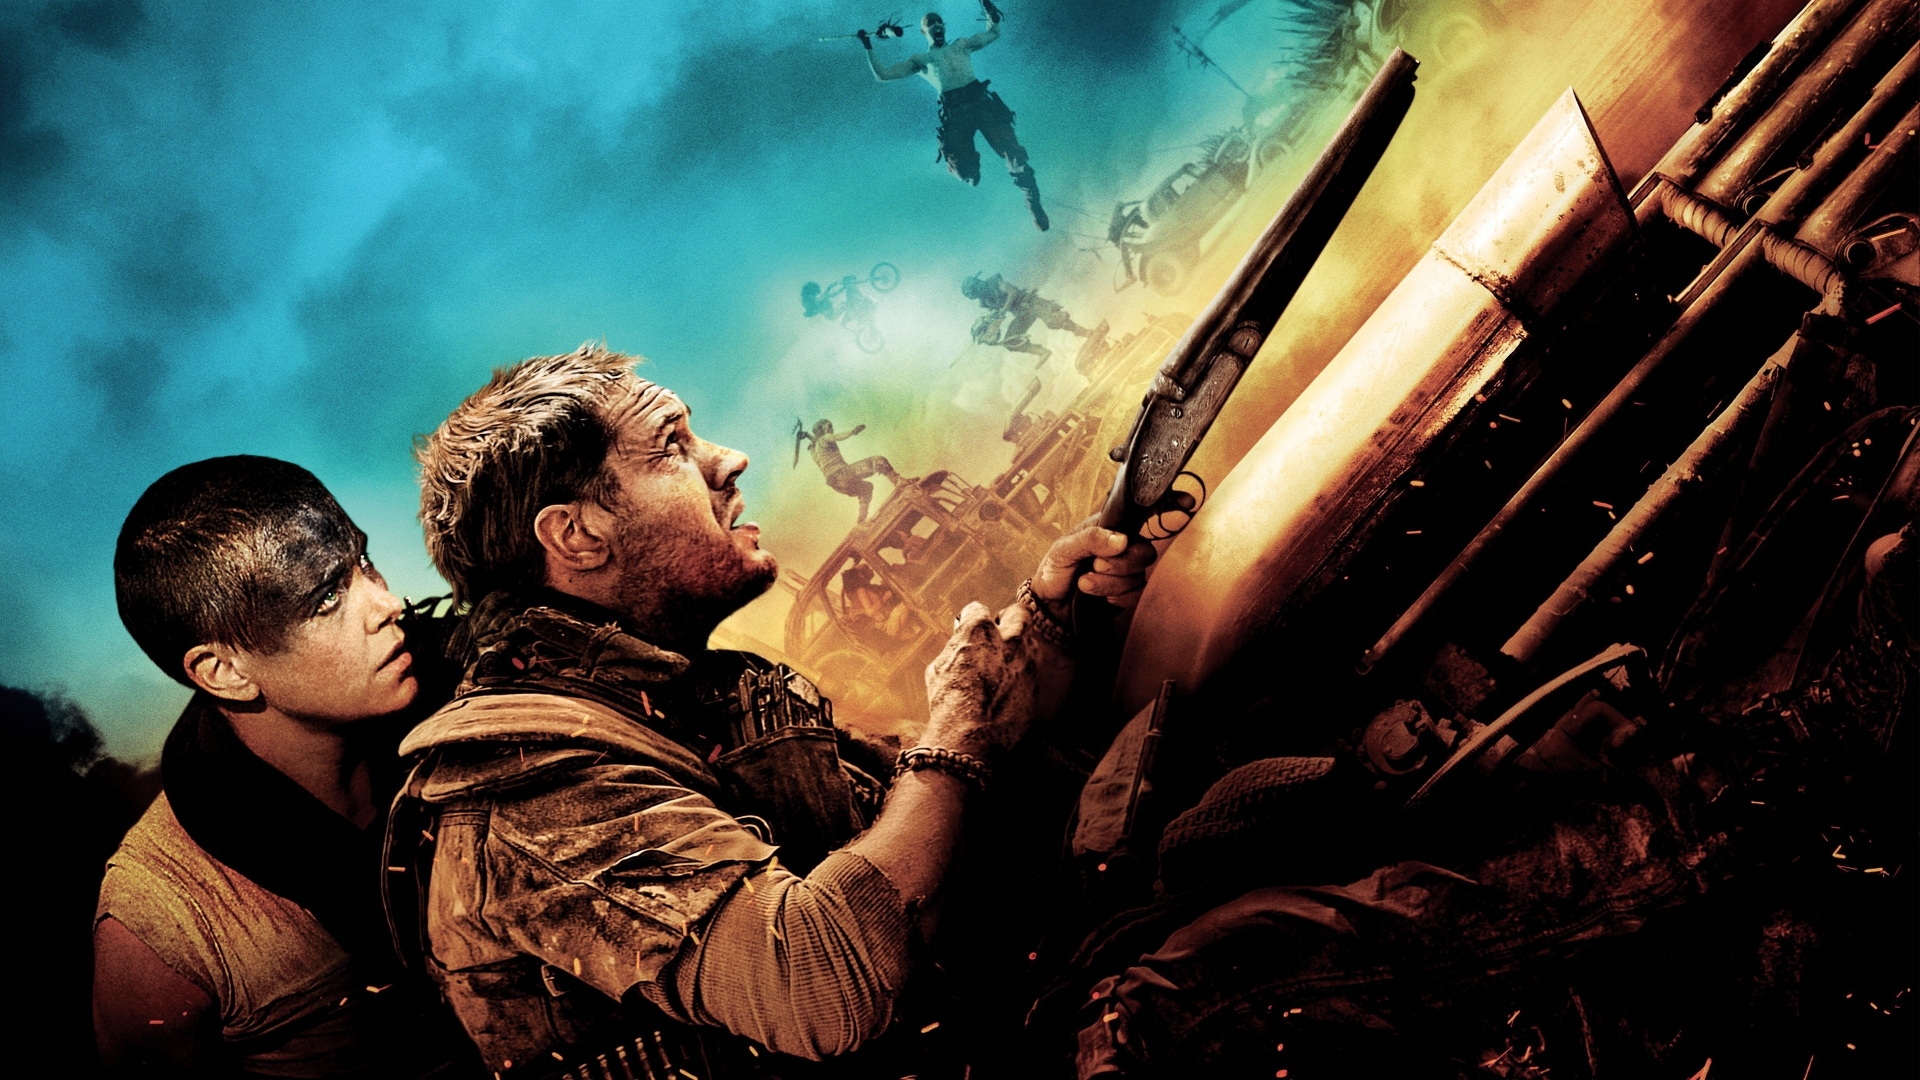 Mad Max 2015 for 1920 x 1080 HDTV 1080p resolution